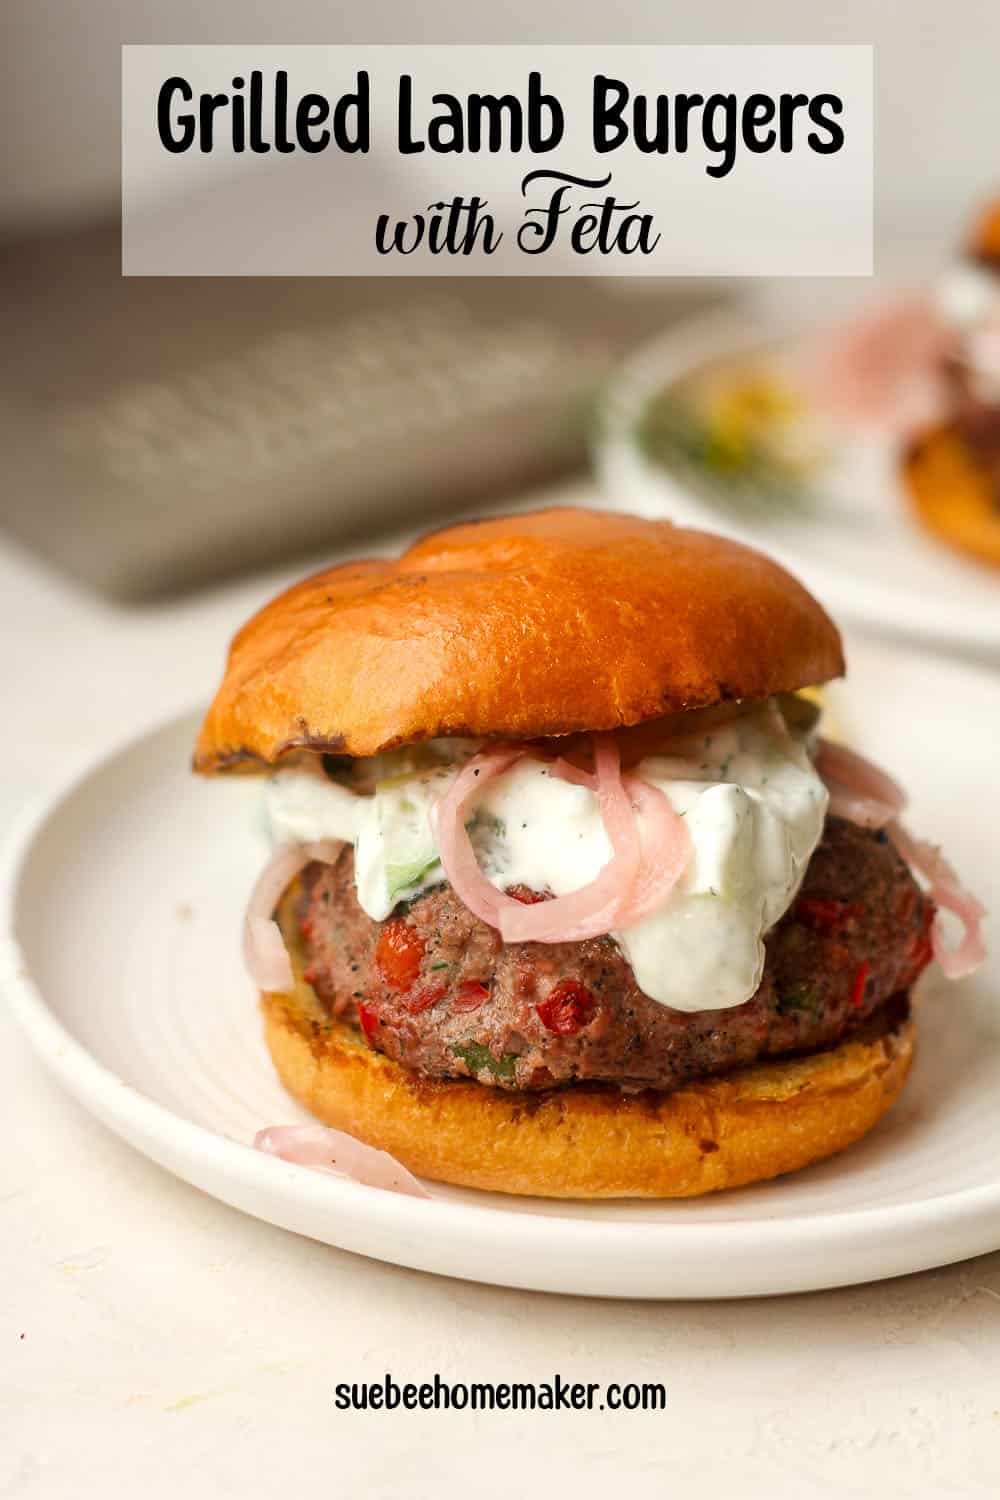 A big lamb burger with feta in a bun with toppings.